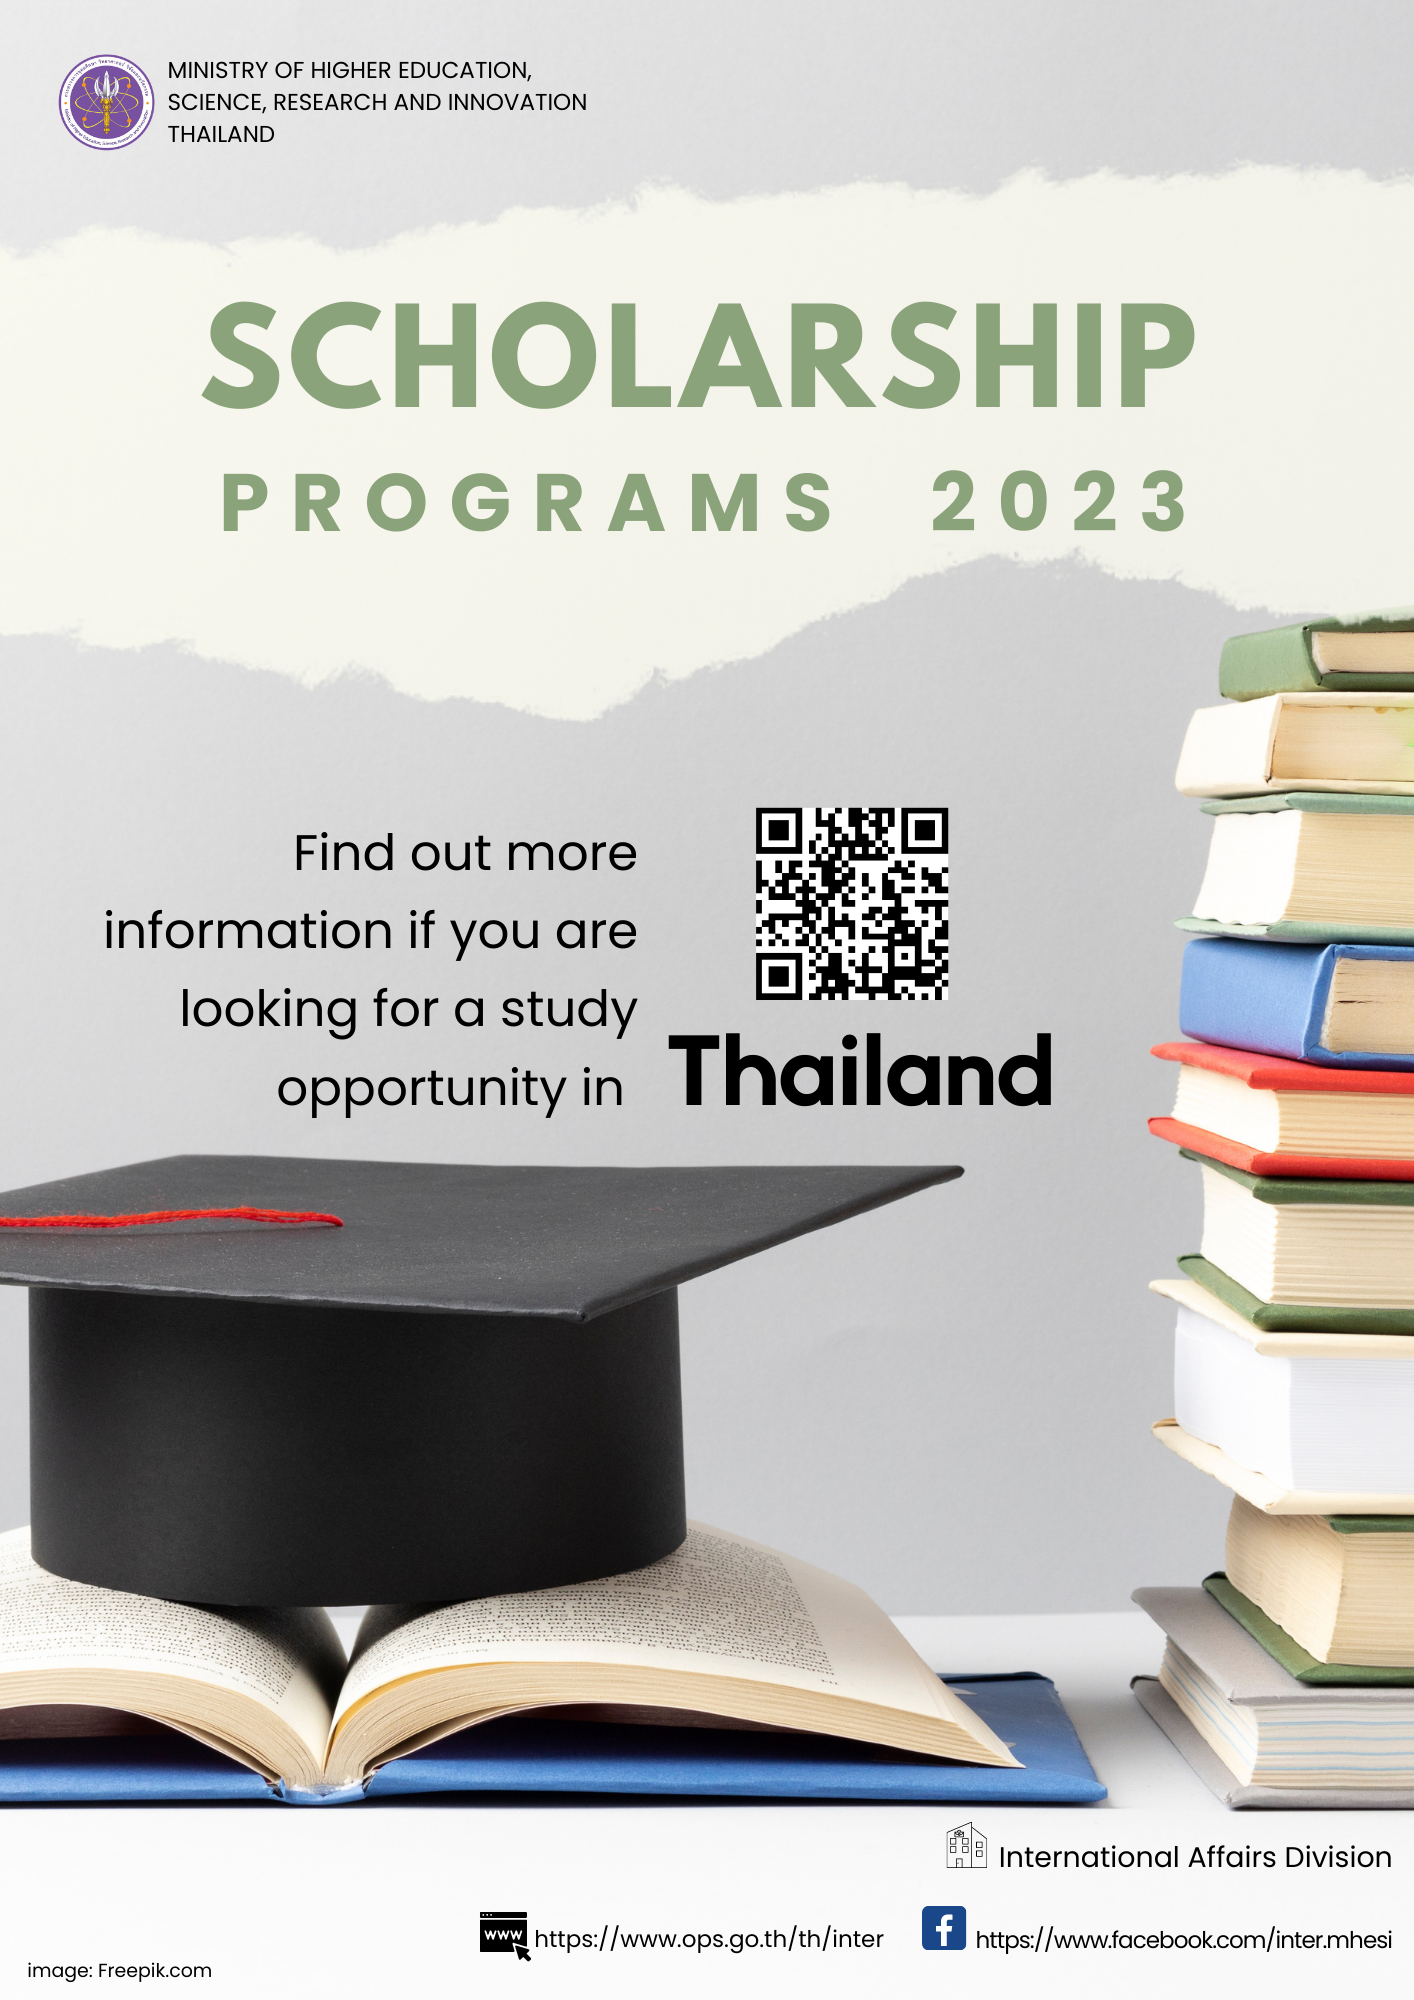 MINISTRY_OF_HIGHER_EDUCATION__SCIENCE__RESEARCH_AND_INNOVATION_THAILAND_(1)